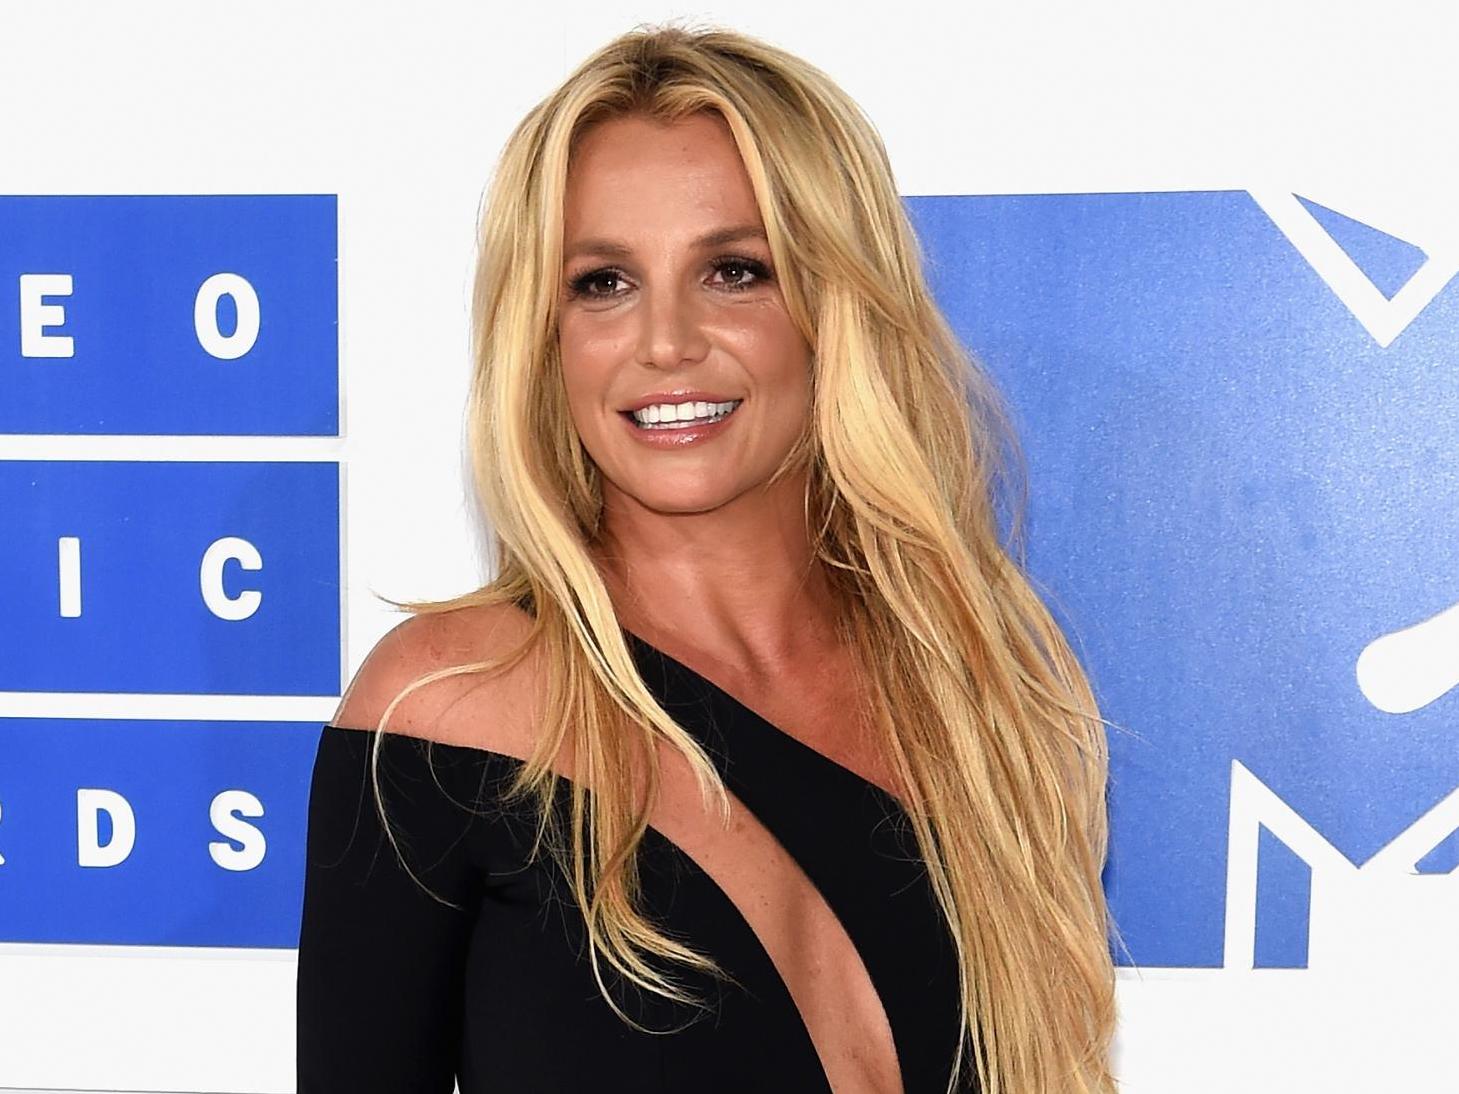 Inherent goodness: Britney Spears attends the MTV Video Music Awards in 2016